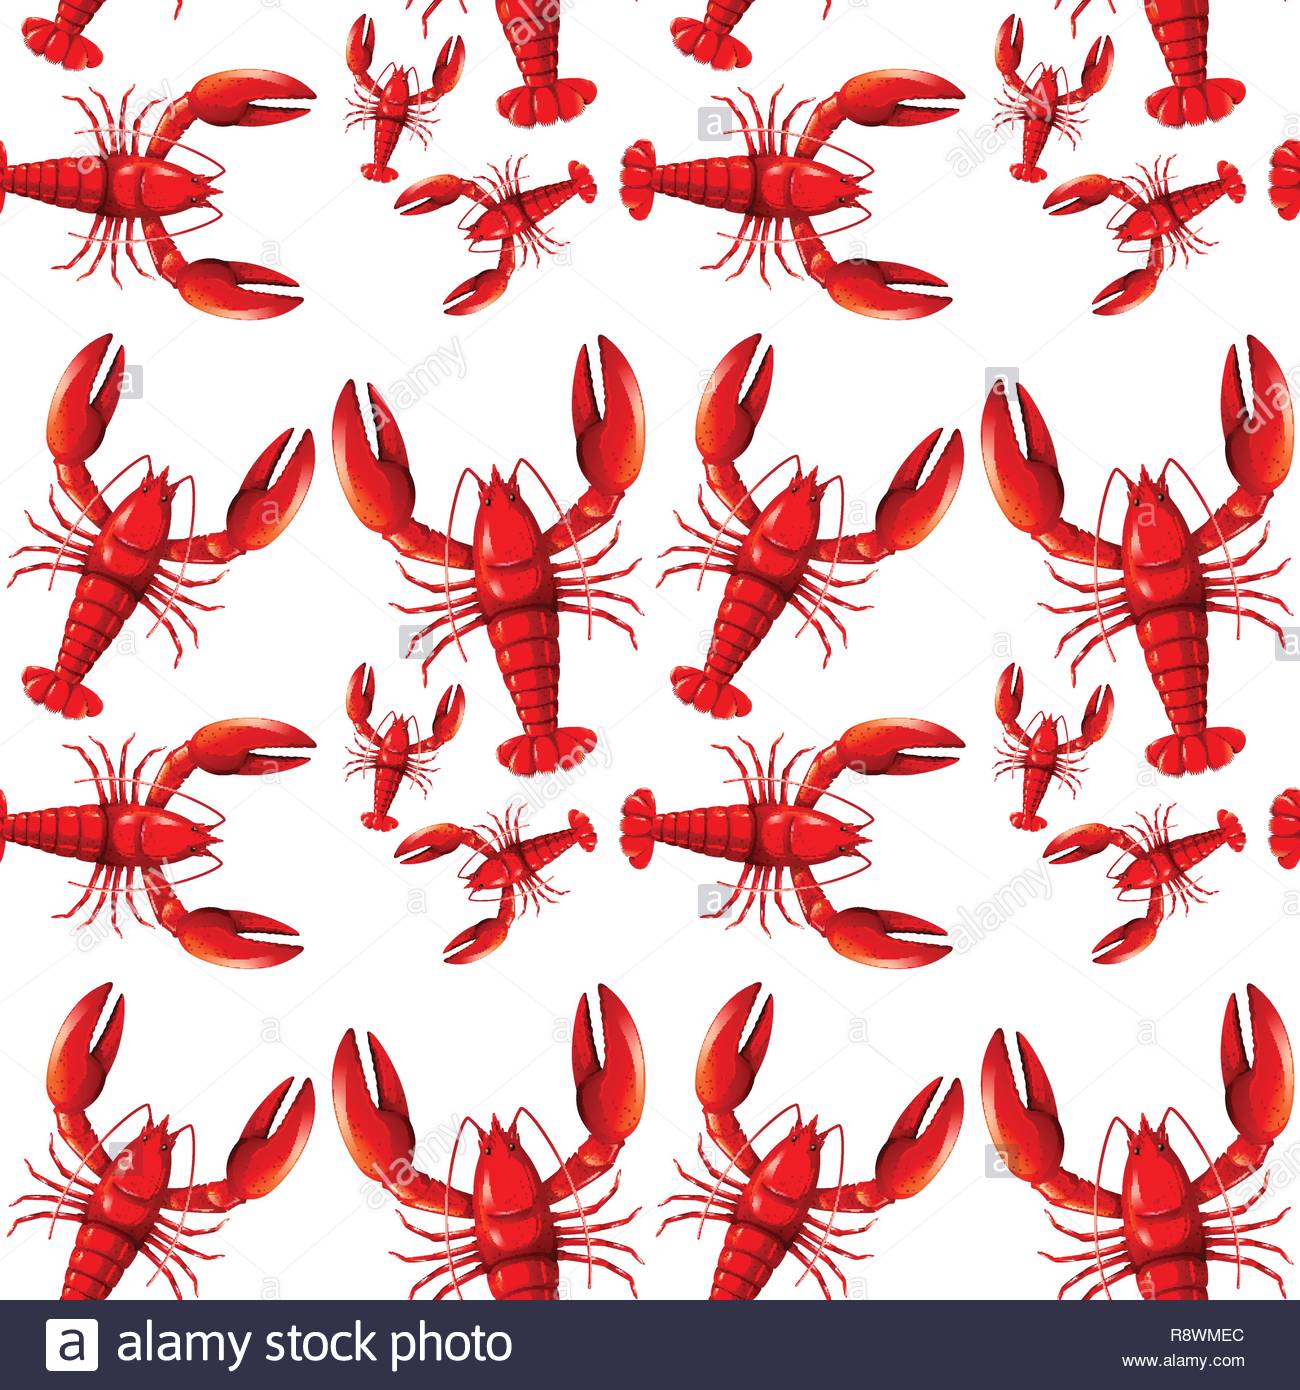 Red Lobster Icon Image Stock Photos